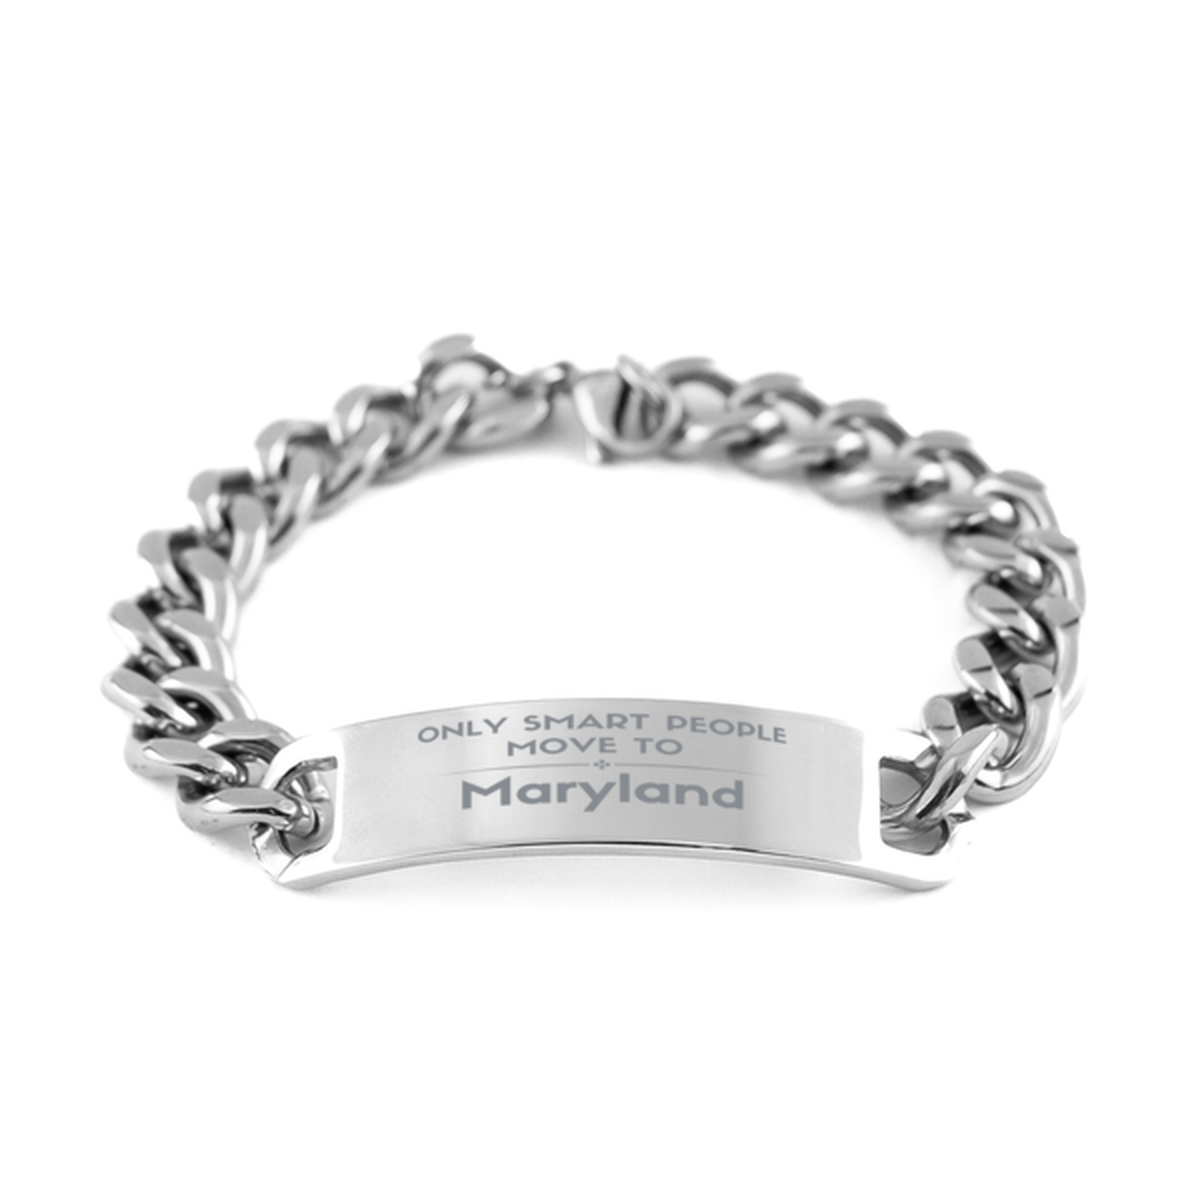 Only smart people move to Maryland Cuban Chain Stainless Steel Bracelet, Gag Gifts For Maryland, Move to Maryland Gifts for Friends Coworker Funny Saying Quote